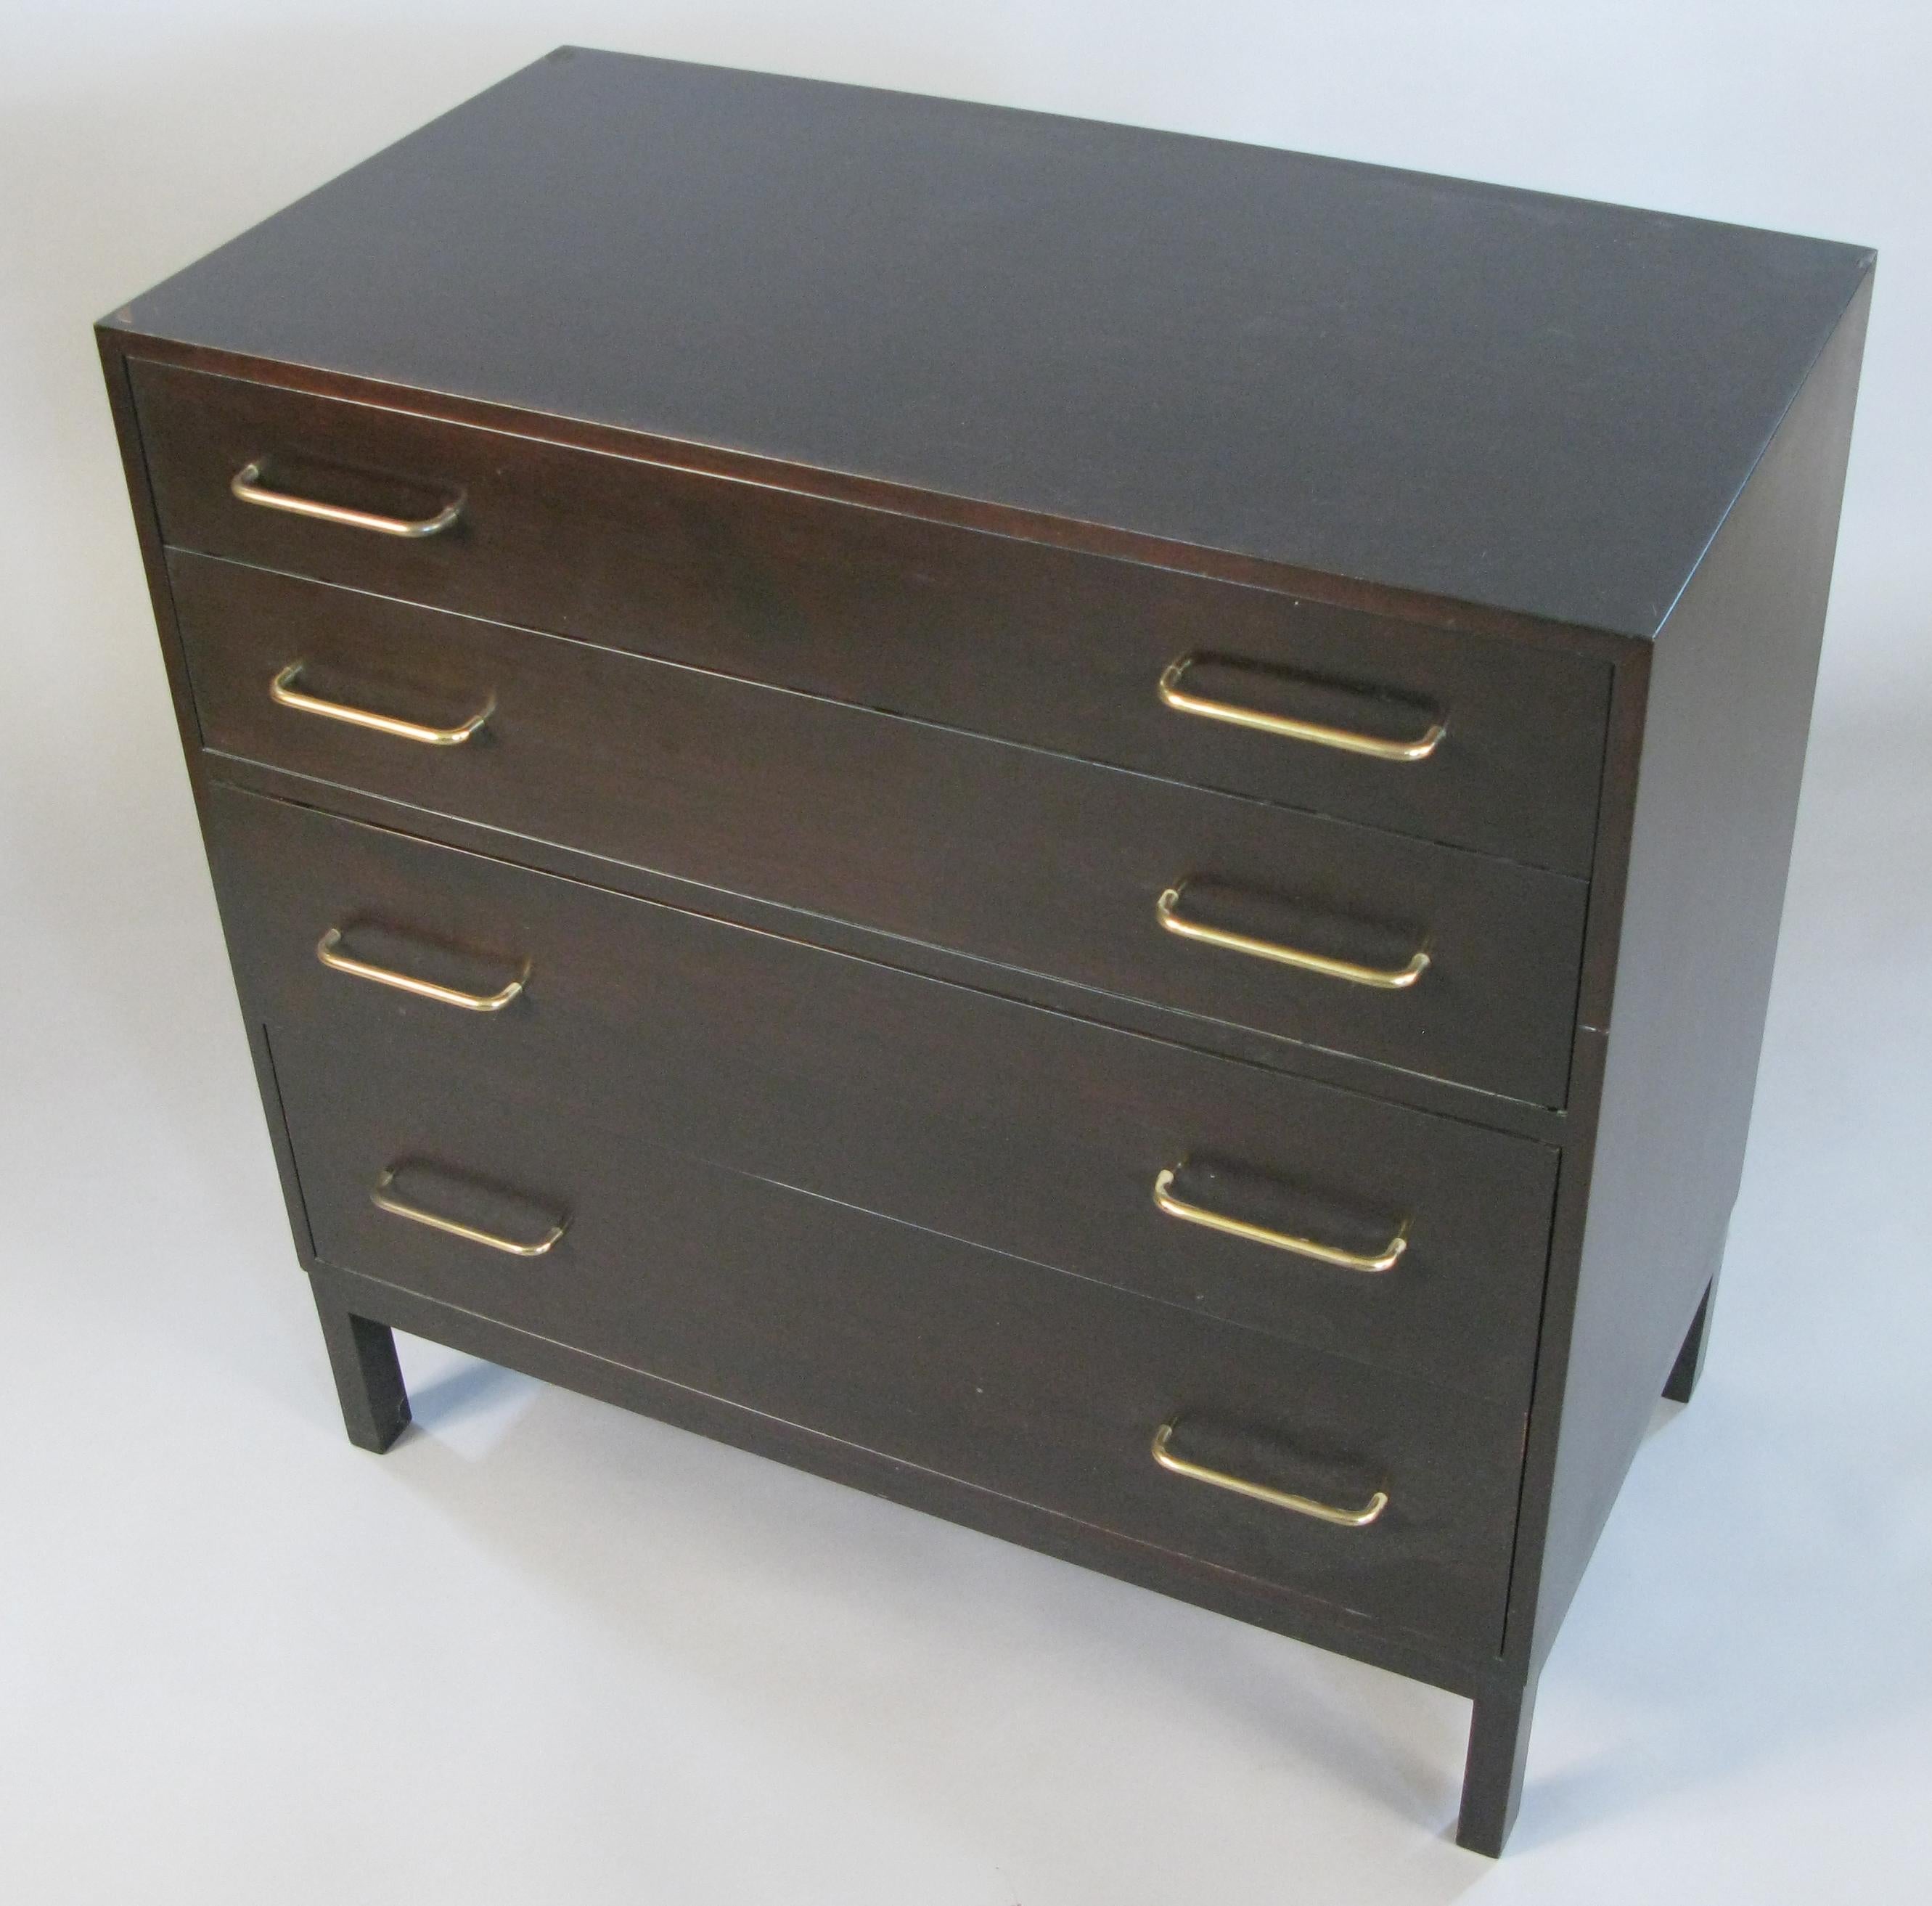 A very handsome vintage 1960s four-drawer chest designed by Edward Wormley for Dunbar. Graduated height drawers have the original brass hardware, and the top drawer is divided. Case has the original dark brown finish, with age expected wear. Top